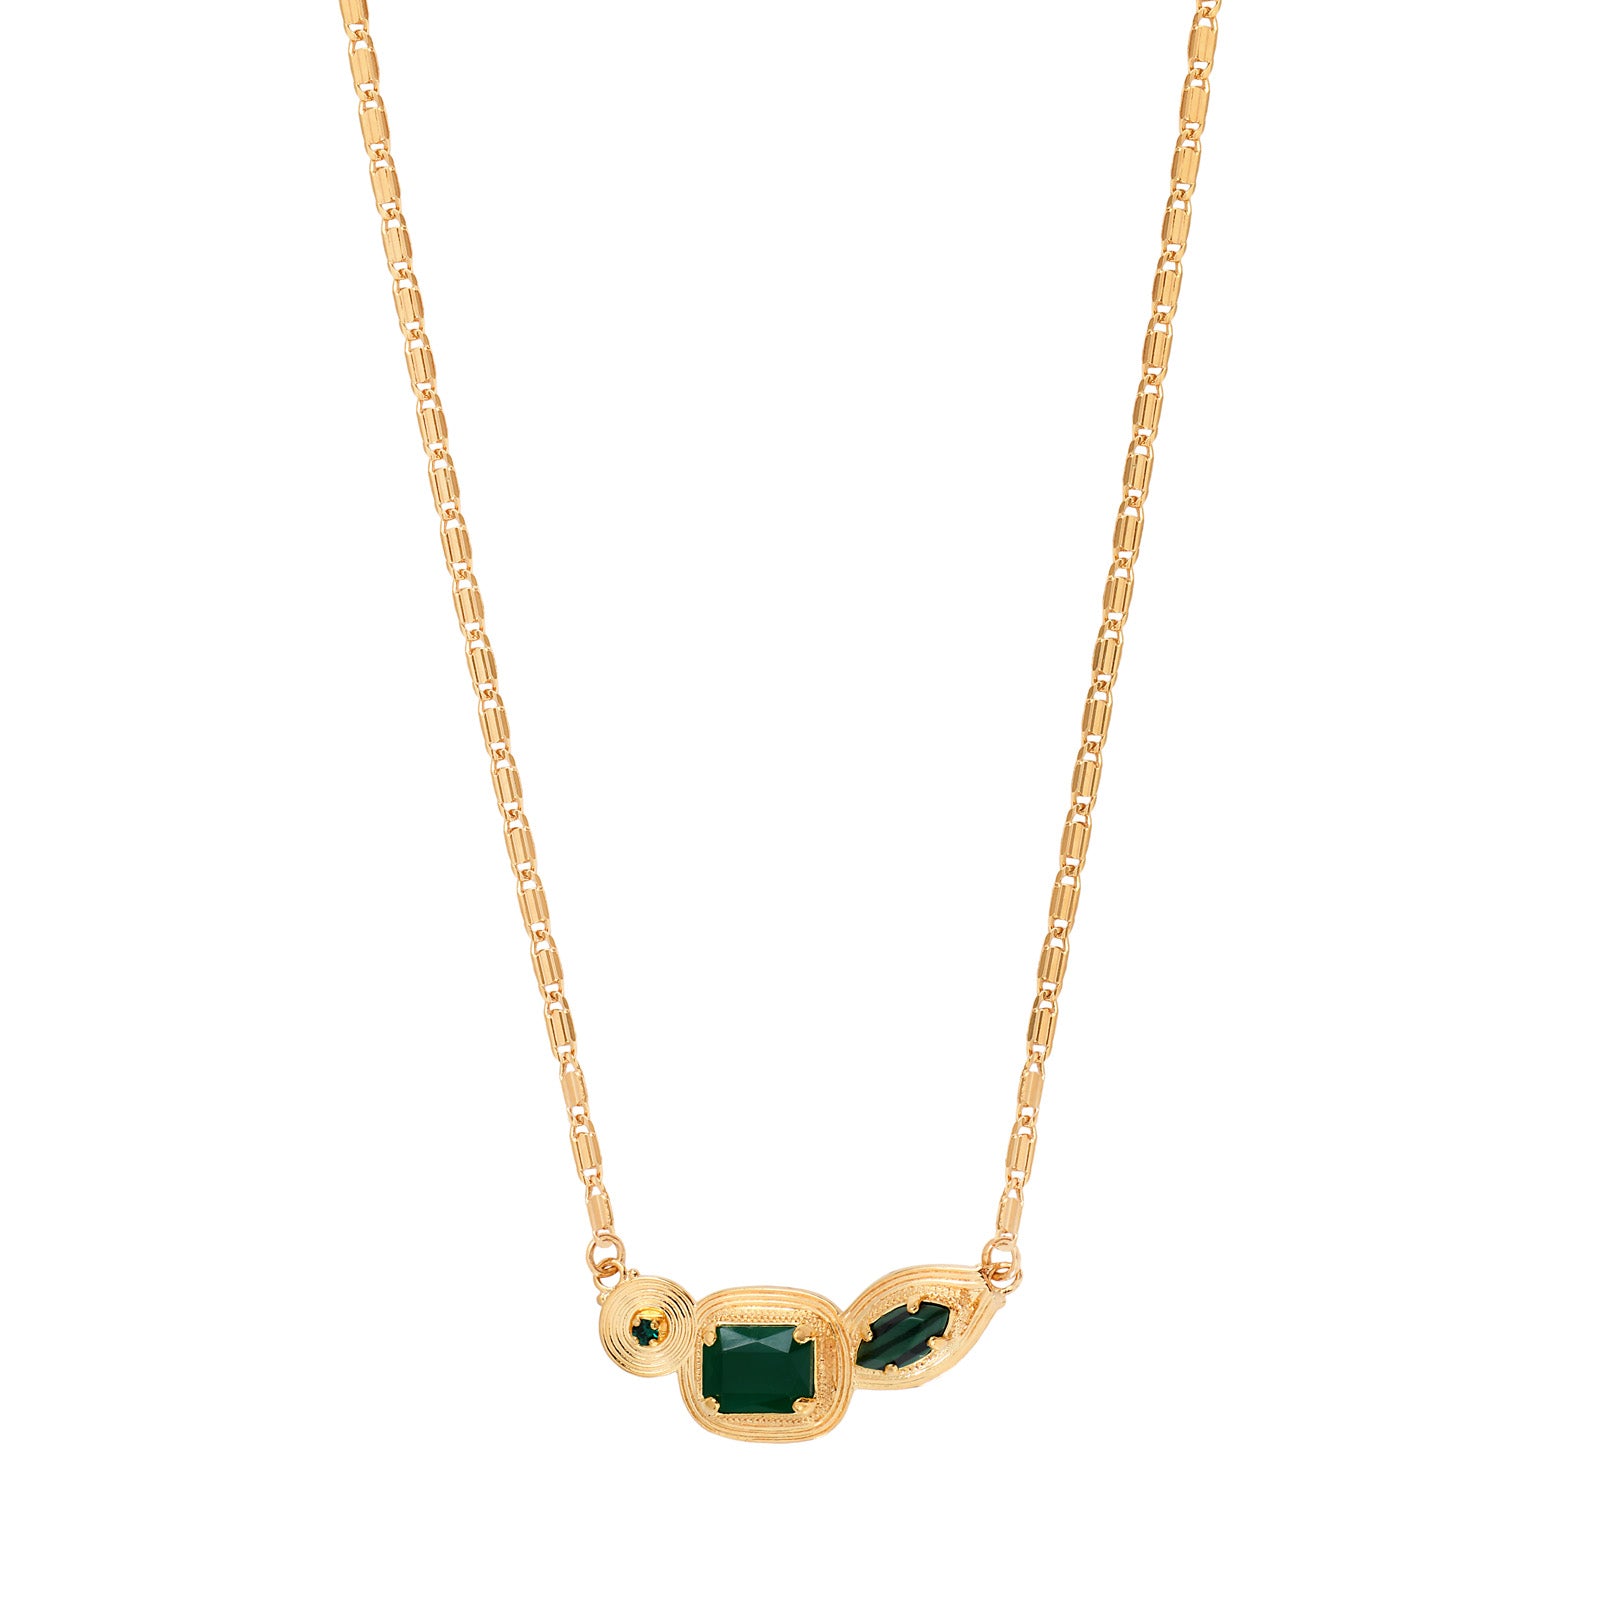 Three shape stone necklace in green